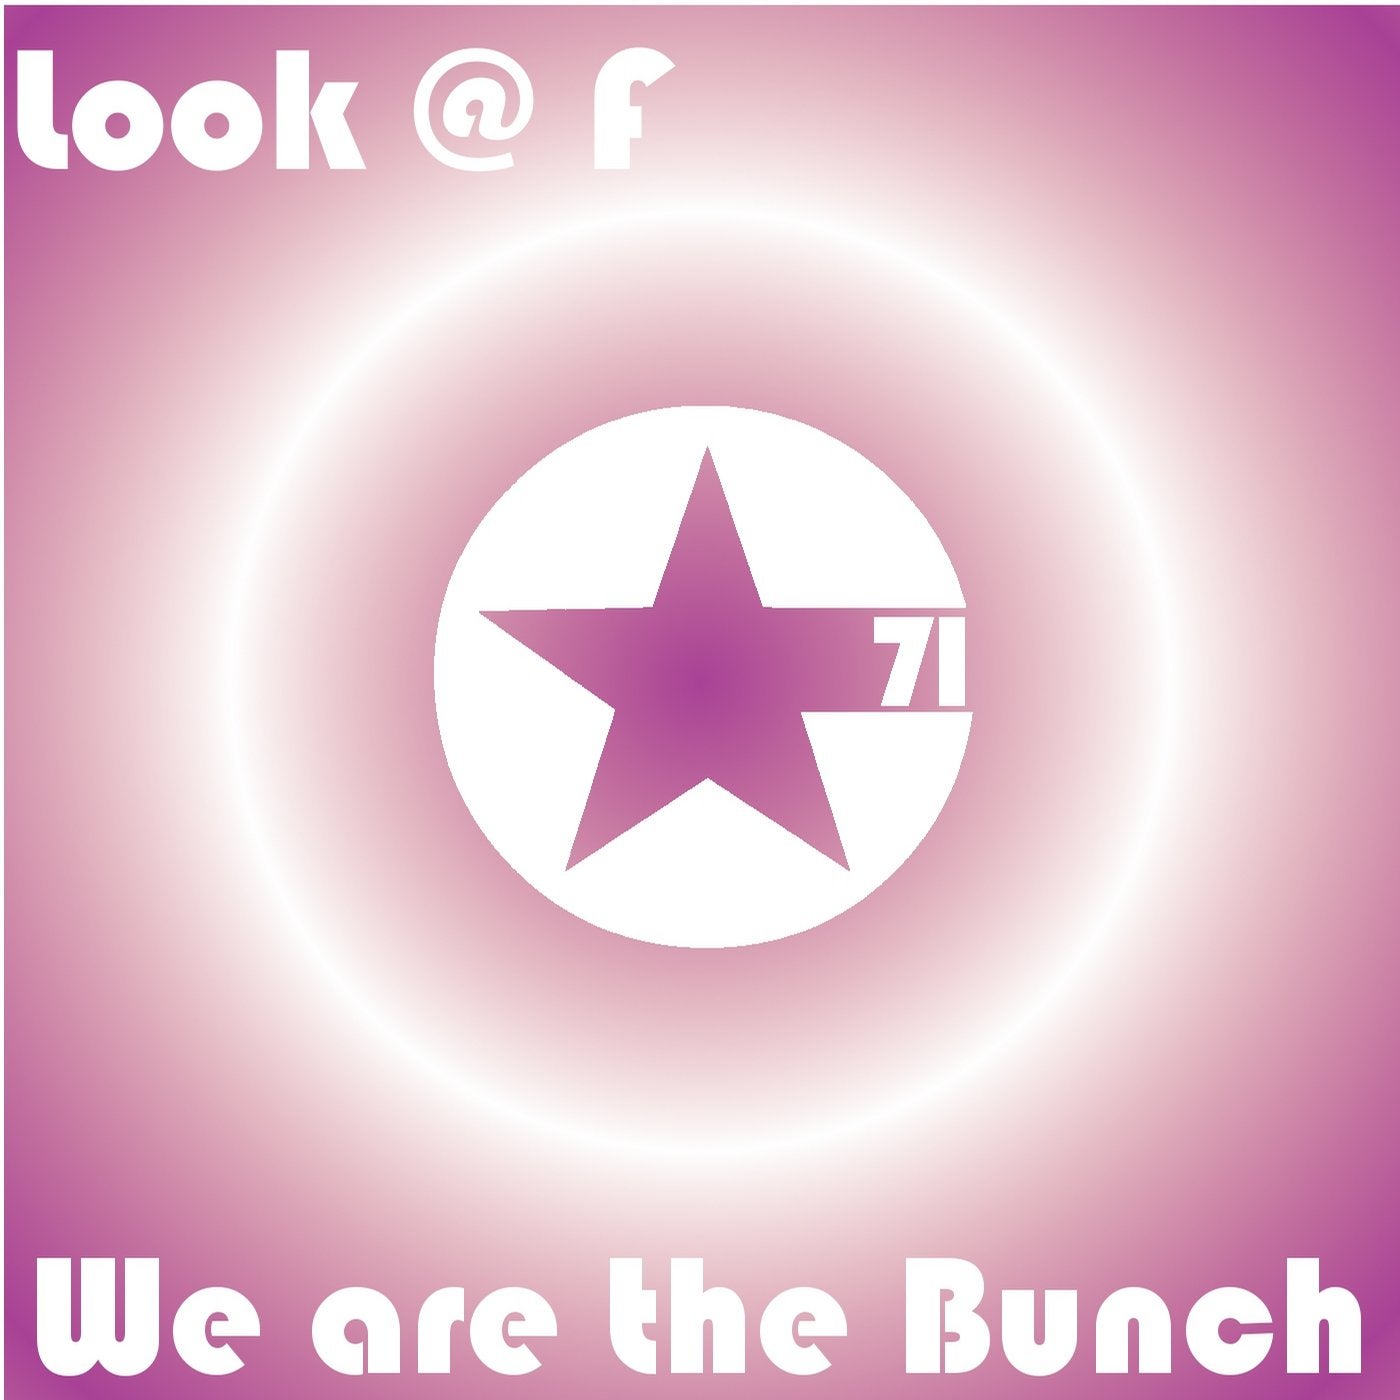 We Are the Bunch